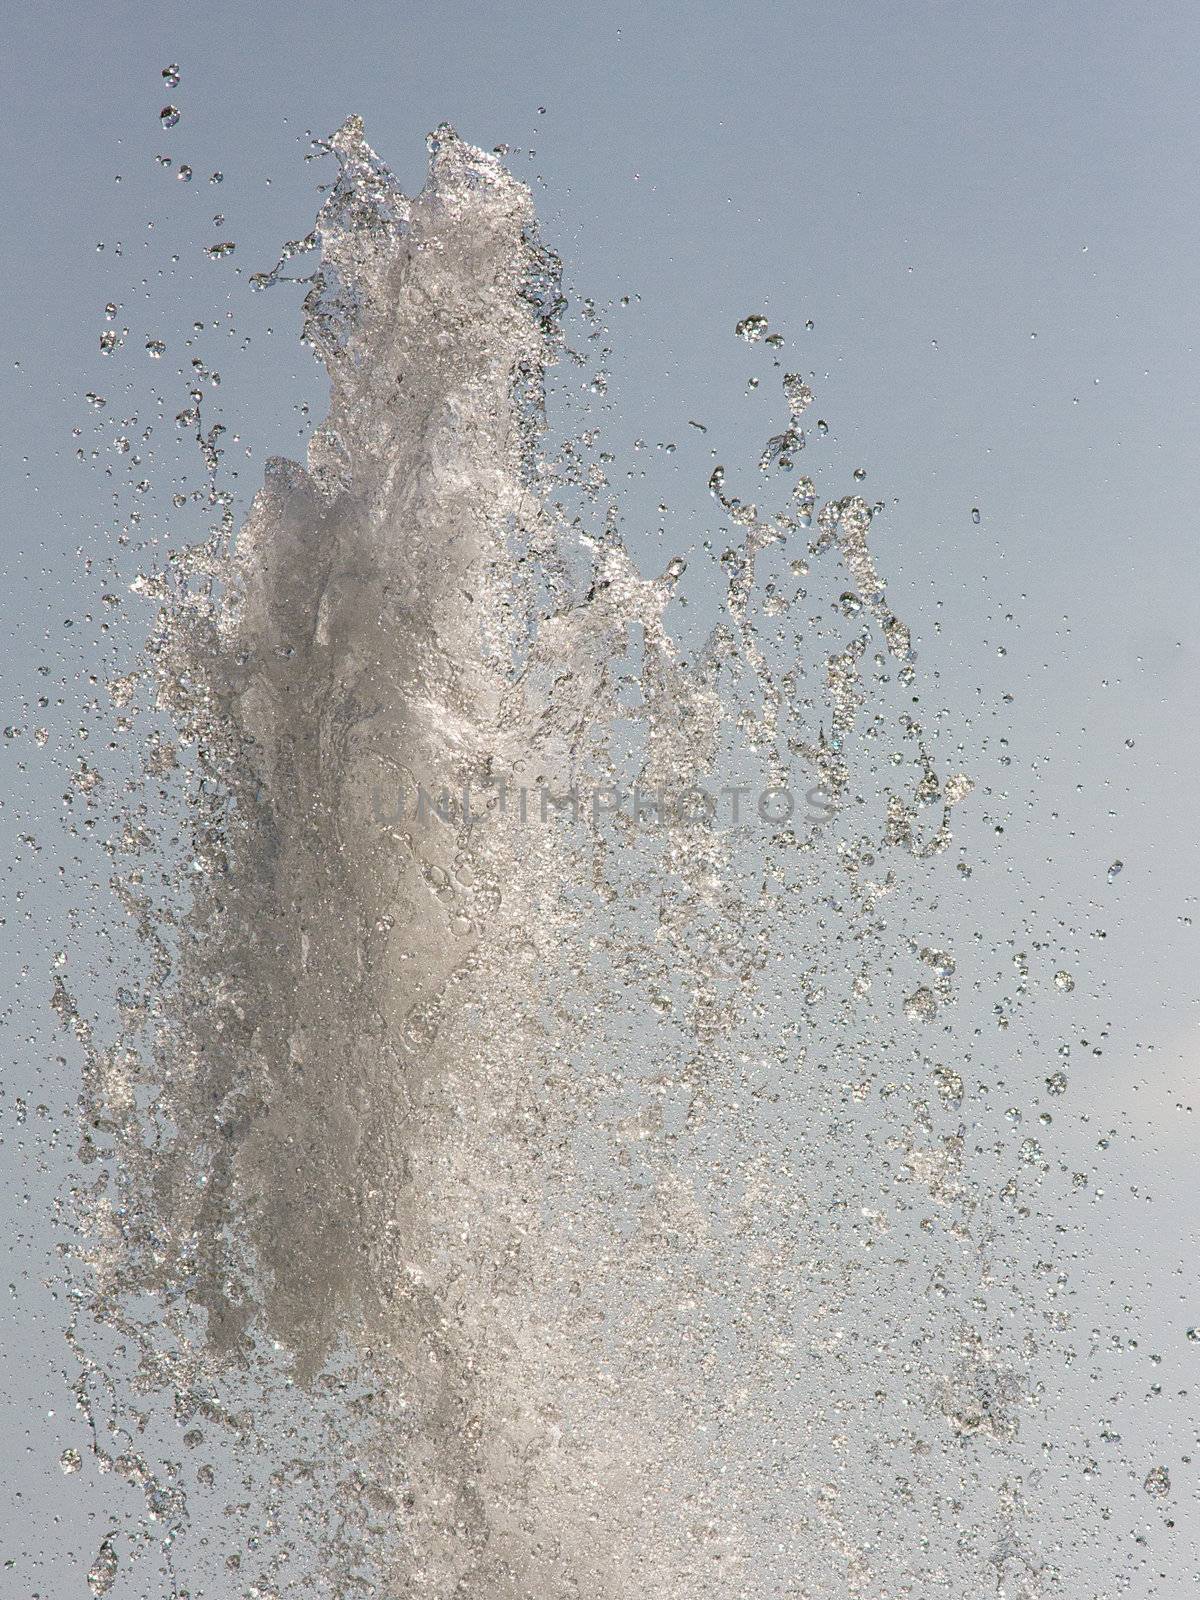 Close up photo of water splashing up the air with waterdrops around and the blue sky in the background